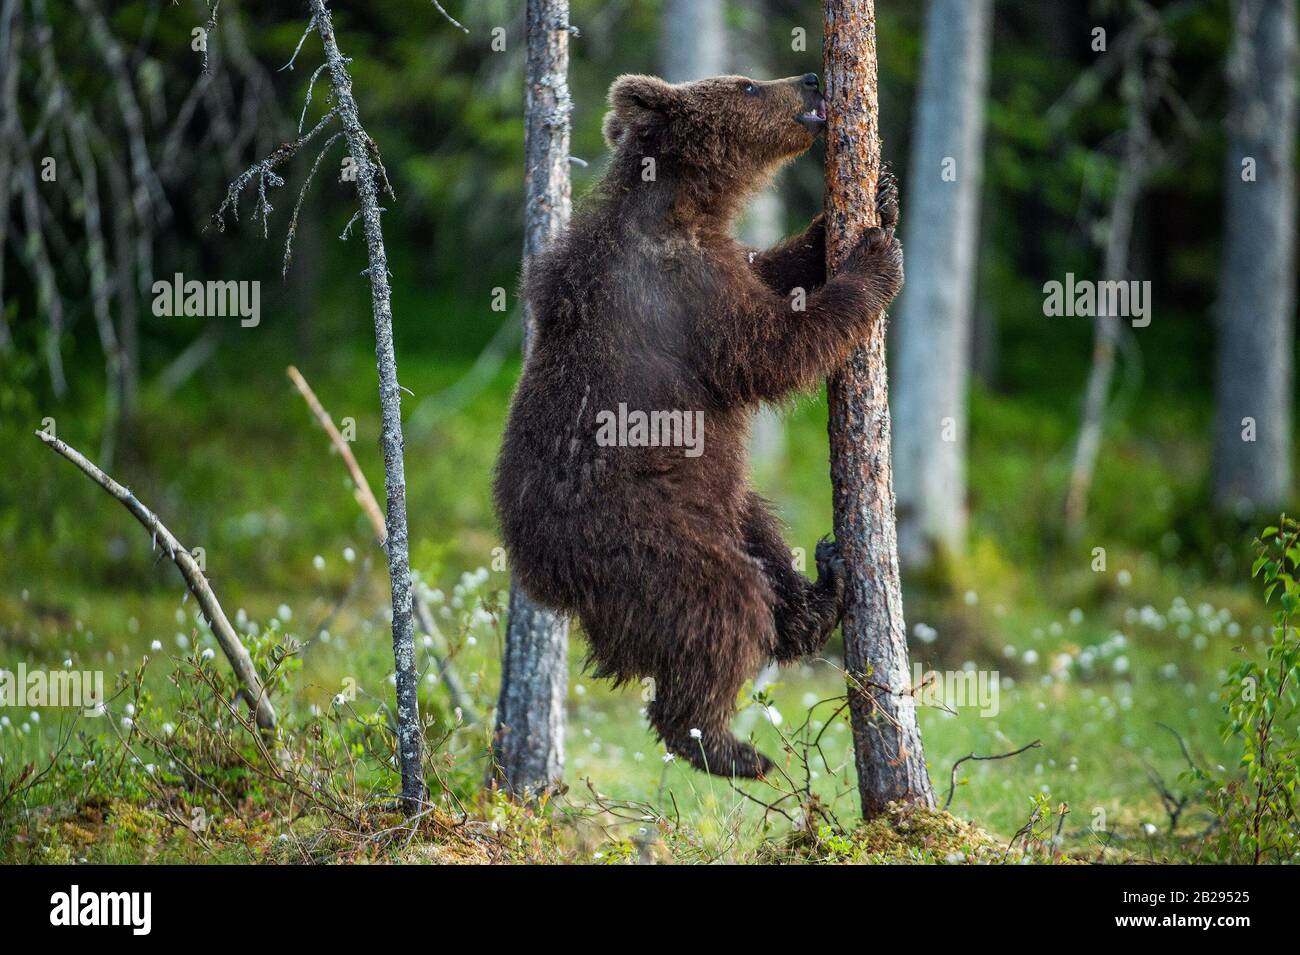 Brown bear cub on the pine tree. Green natural background.  Natural habitat. Summer forest. Scientific name: Ursus arctos. Stock Photo